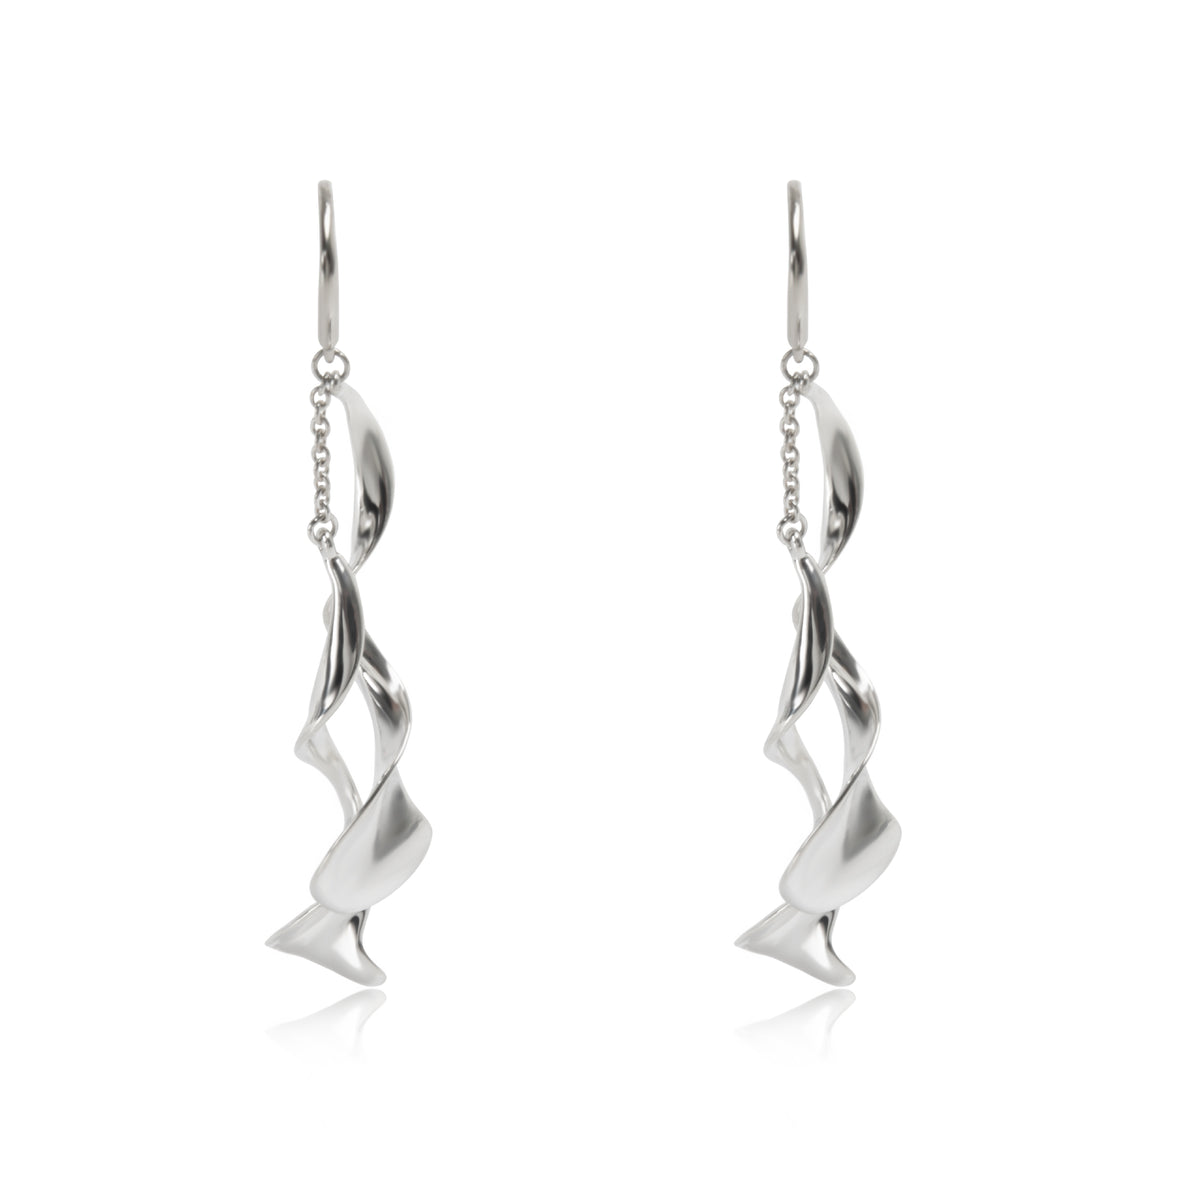 Tiffany & Co.  Frank Gehry Orchid Earrings in  Sterling Silver